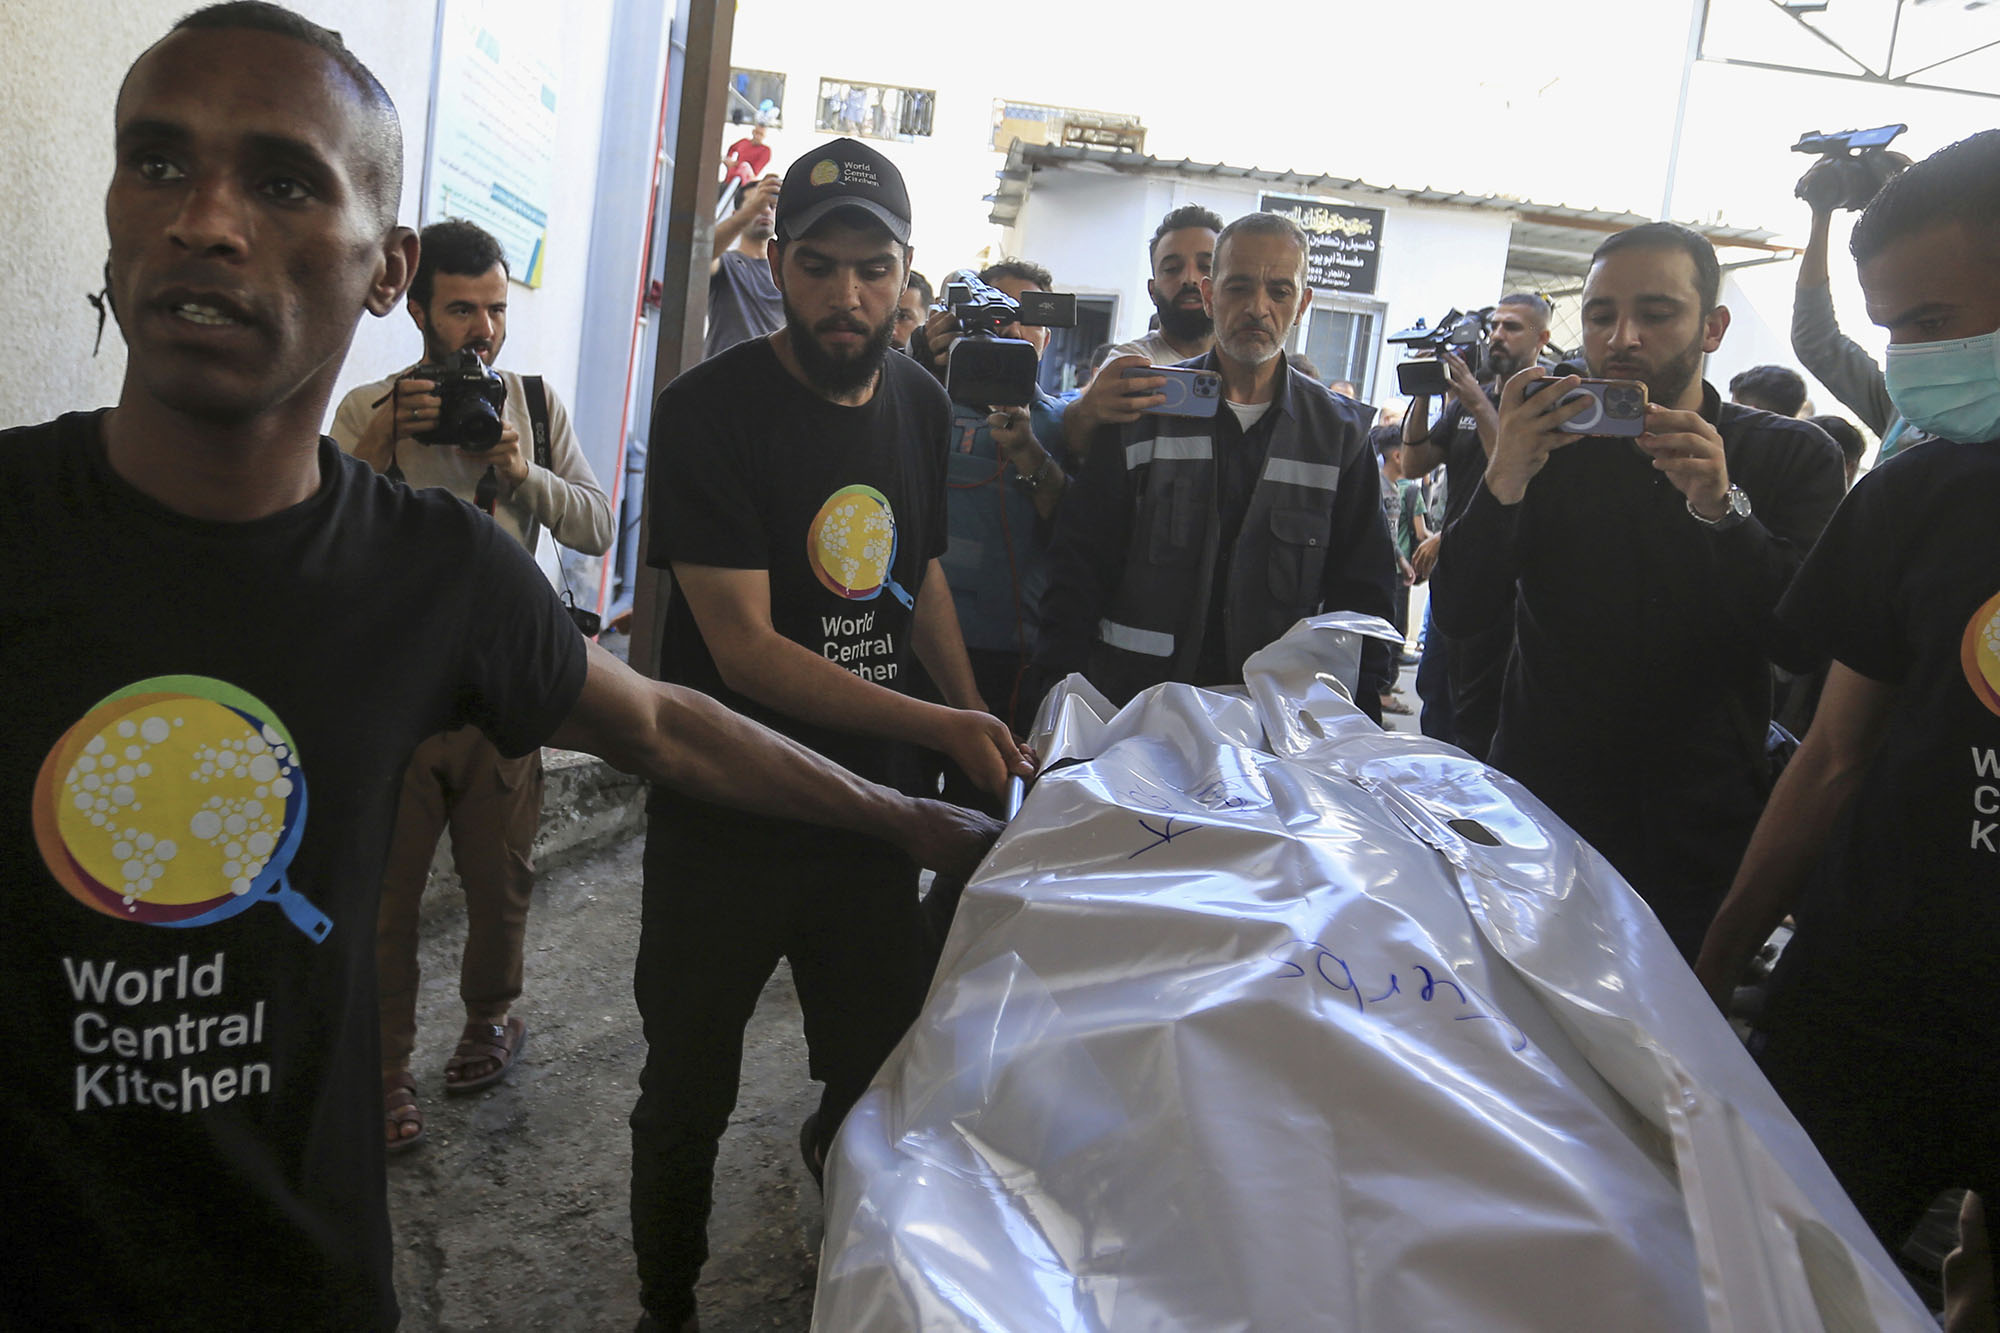 Members of the World Central Kitchen aid group transports the body of one of the staff members killed in an Israeli air strike out of the morgue of Abu Youssef Al-Najjar Hospital in Rafah, Gaza, on April 3.